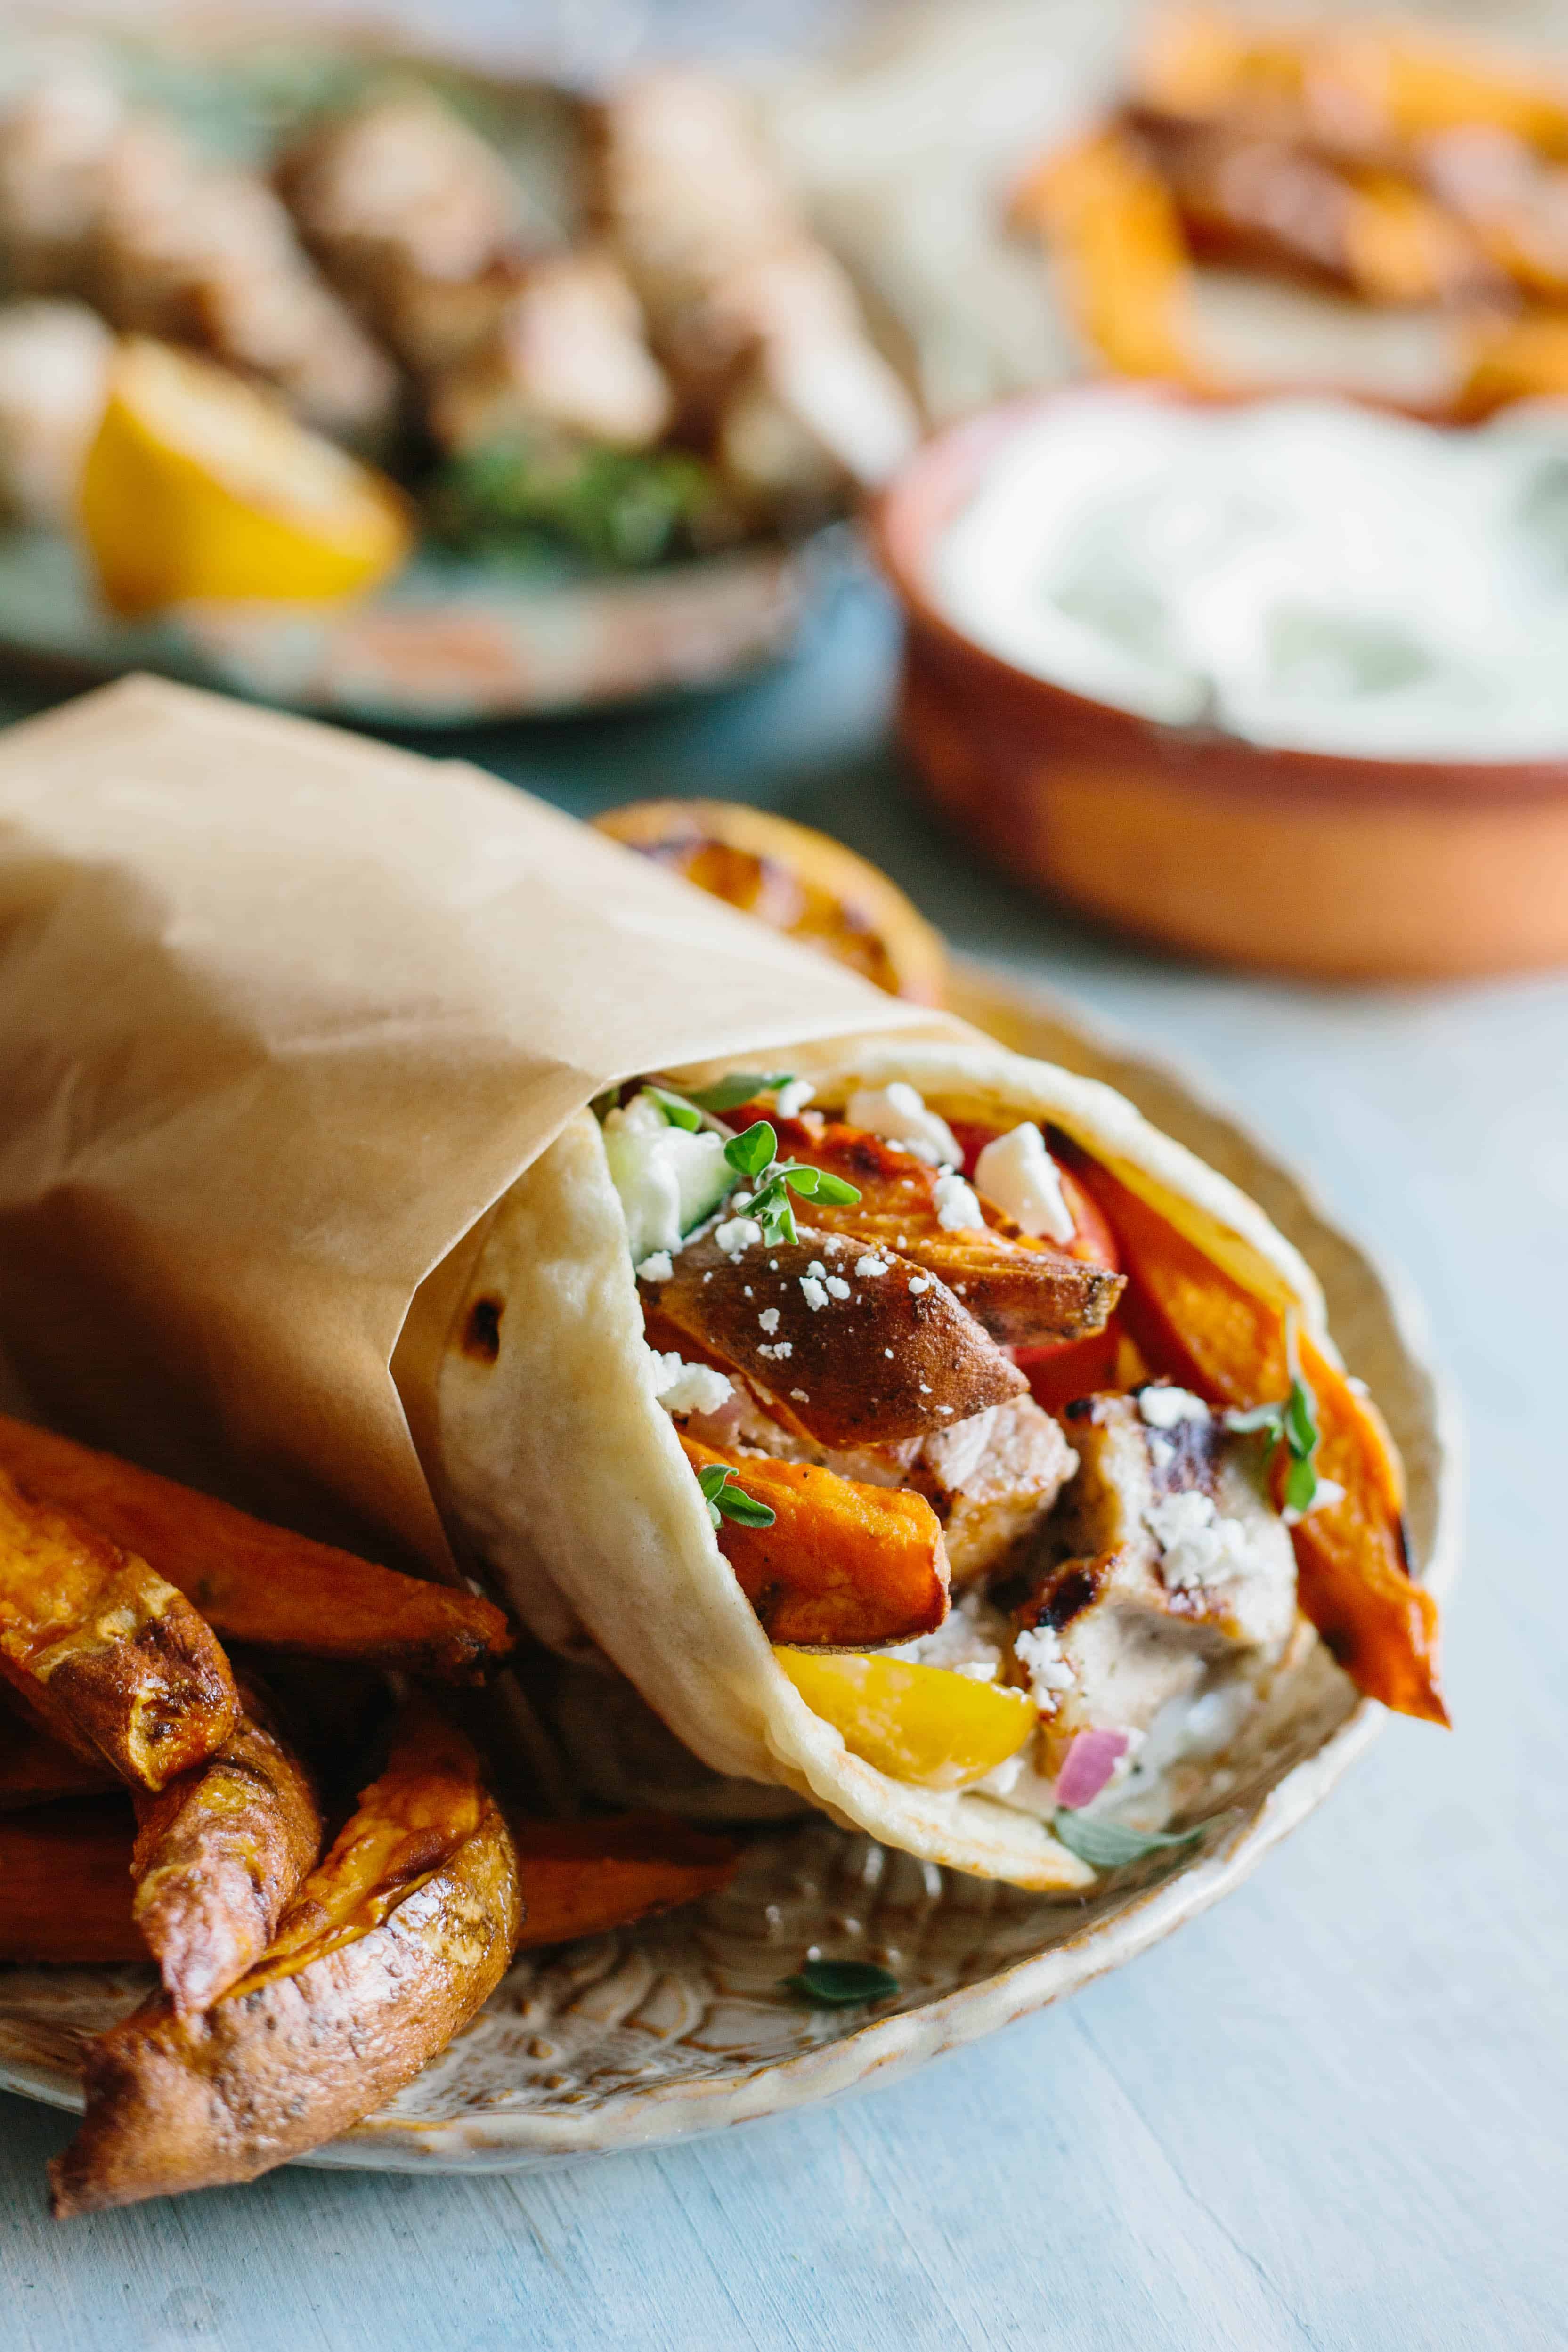 Close up of pork, sweet potatoes, and cucumber salad wrapped up in a pita.